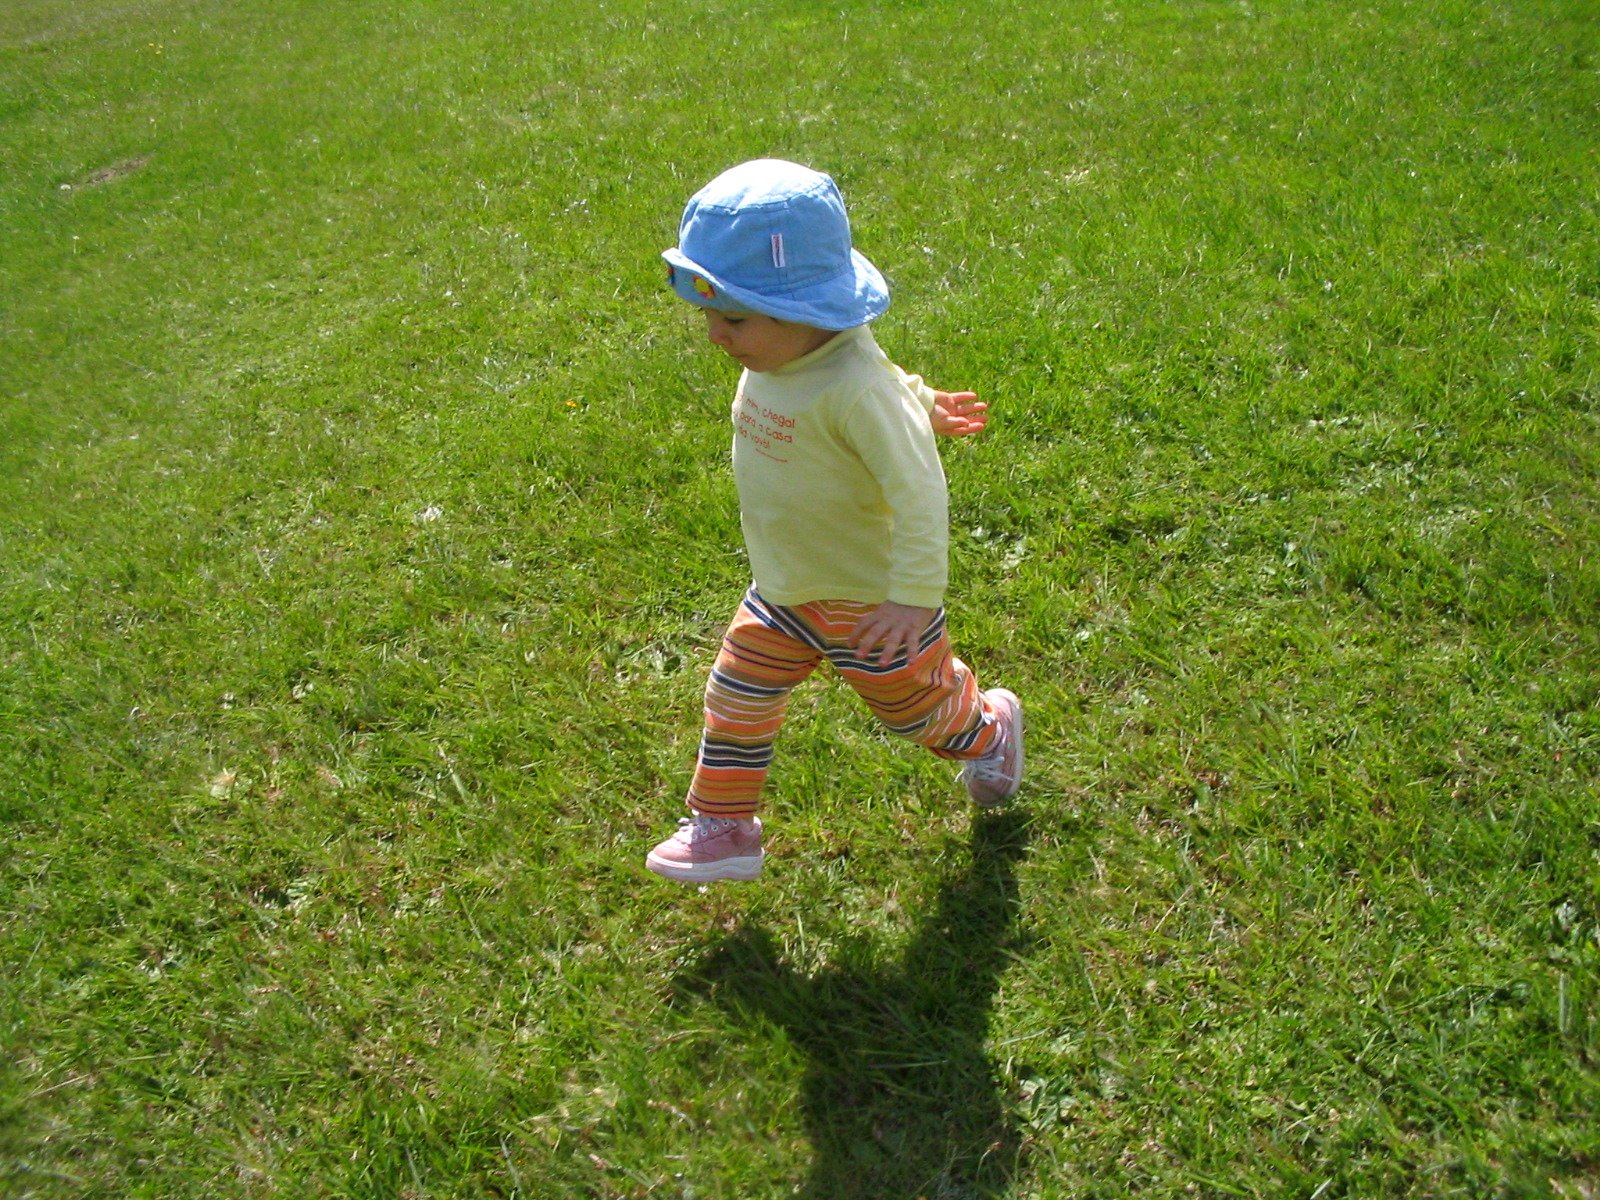 a little child walking in the grass with a disc on its hands